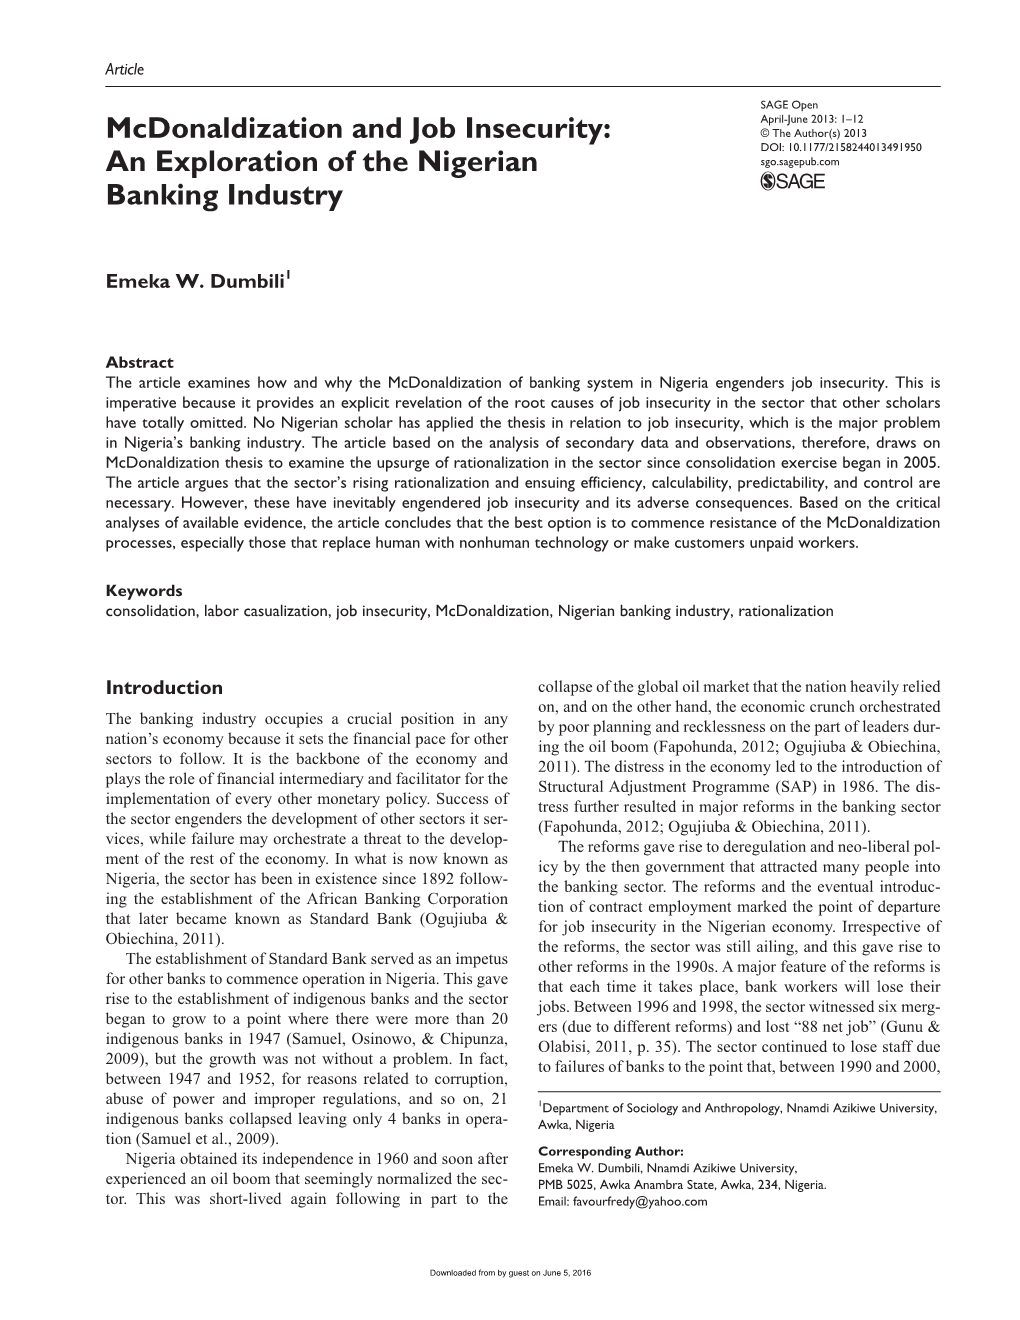 An Exploration of the Nigerian Banking Industry